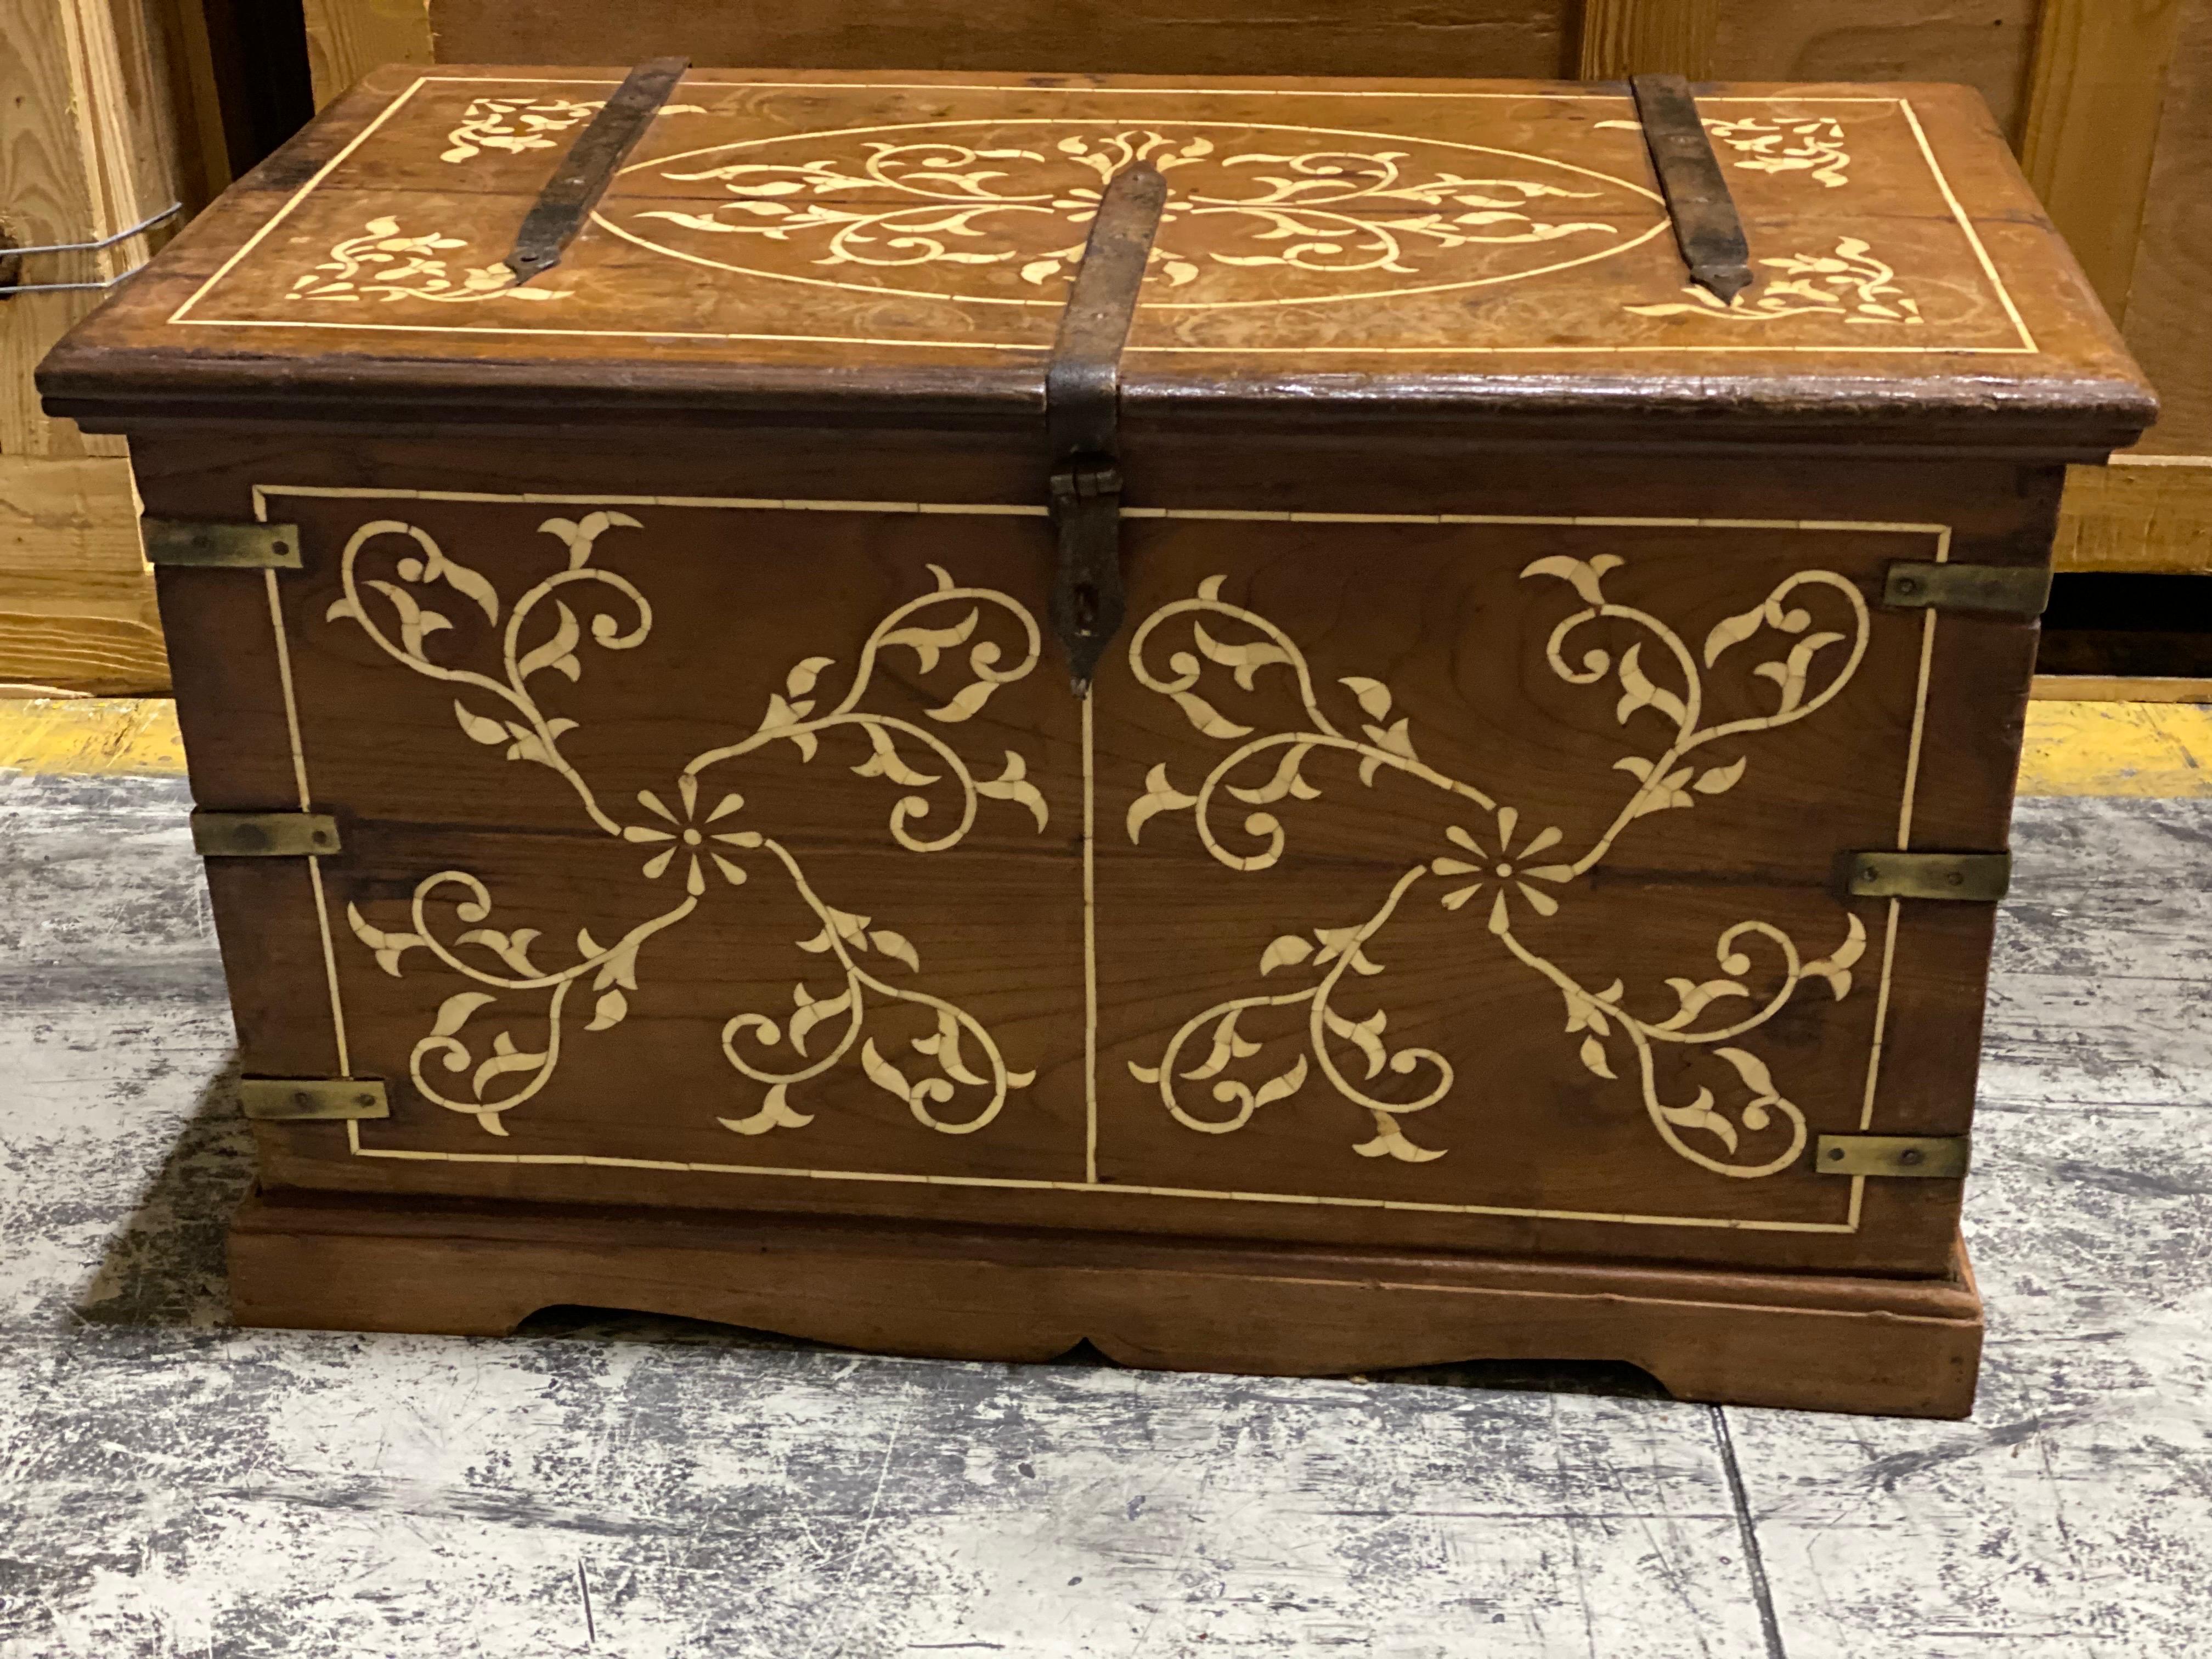 19th Century French walnut & bone floral inlaid trunk.
A smaller size trunk with beautiful floral inlaid bone design on the top, front and sides. The back left plain. Brass hardware looks original cut into the wood. The top wrought iron straps look